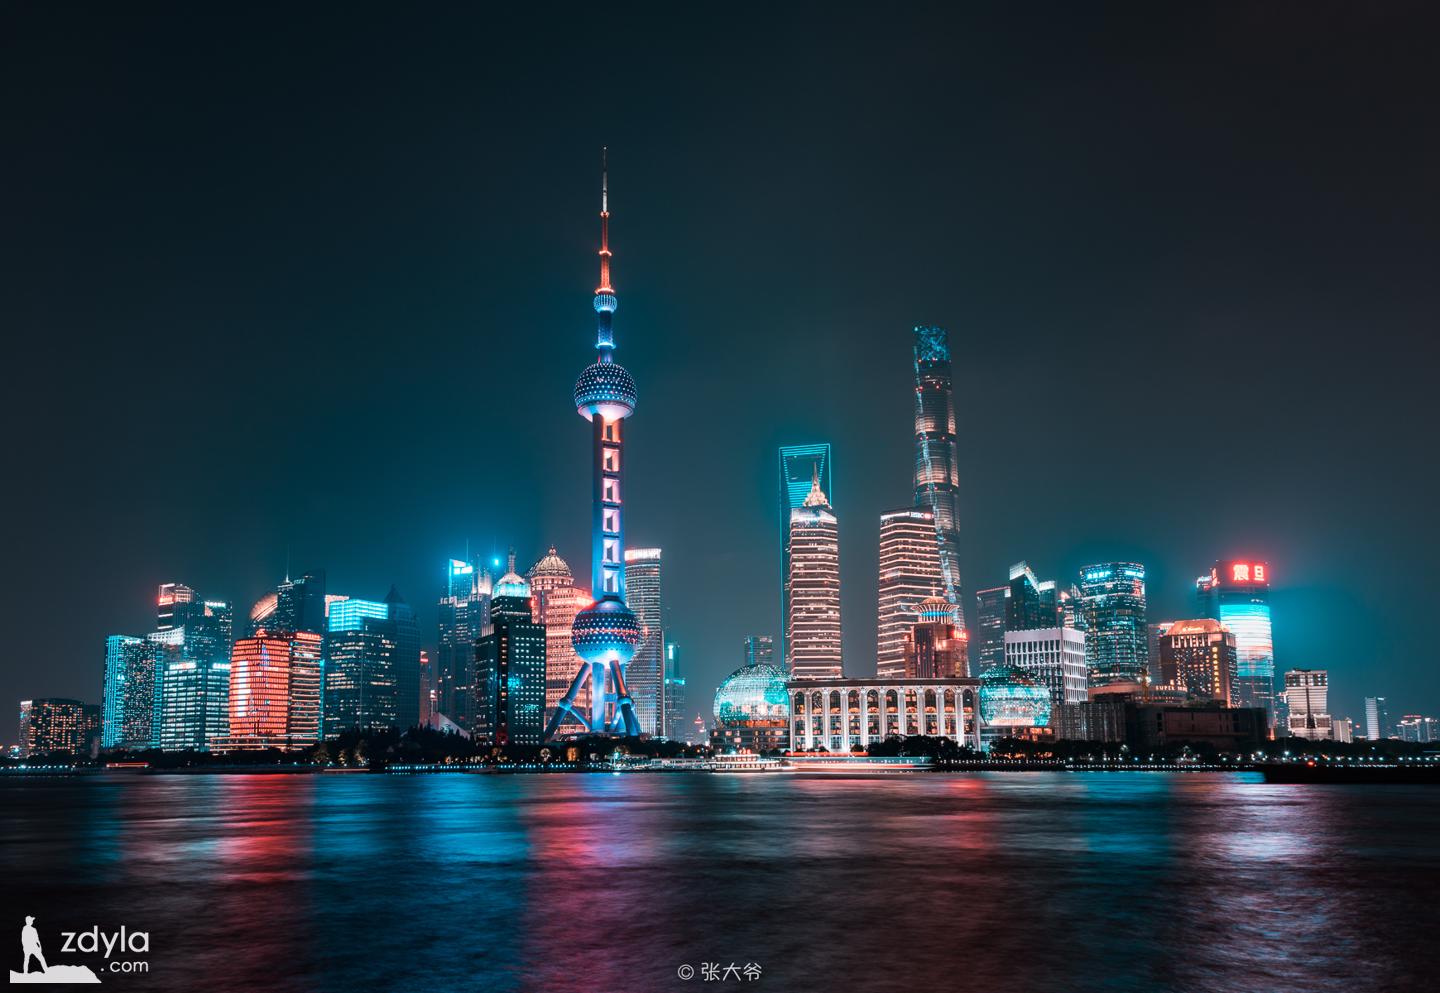 It's time to shoot the Bund again!